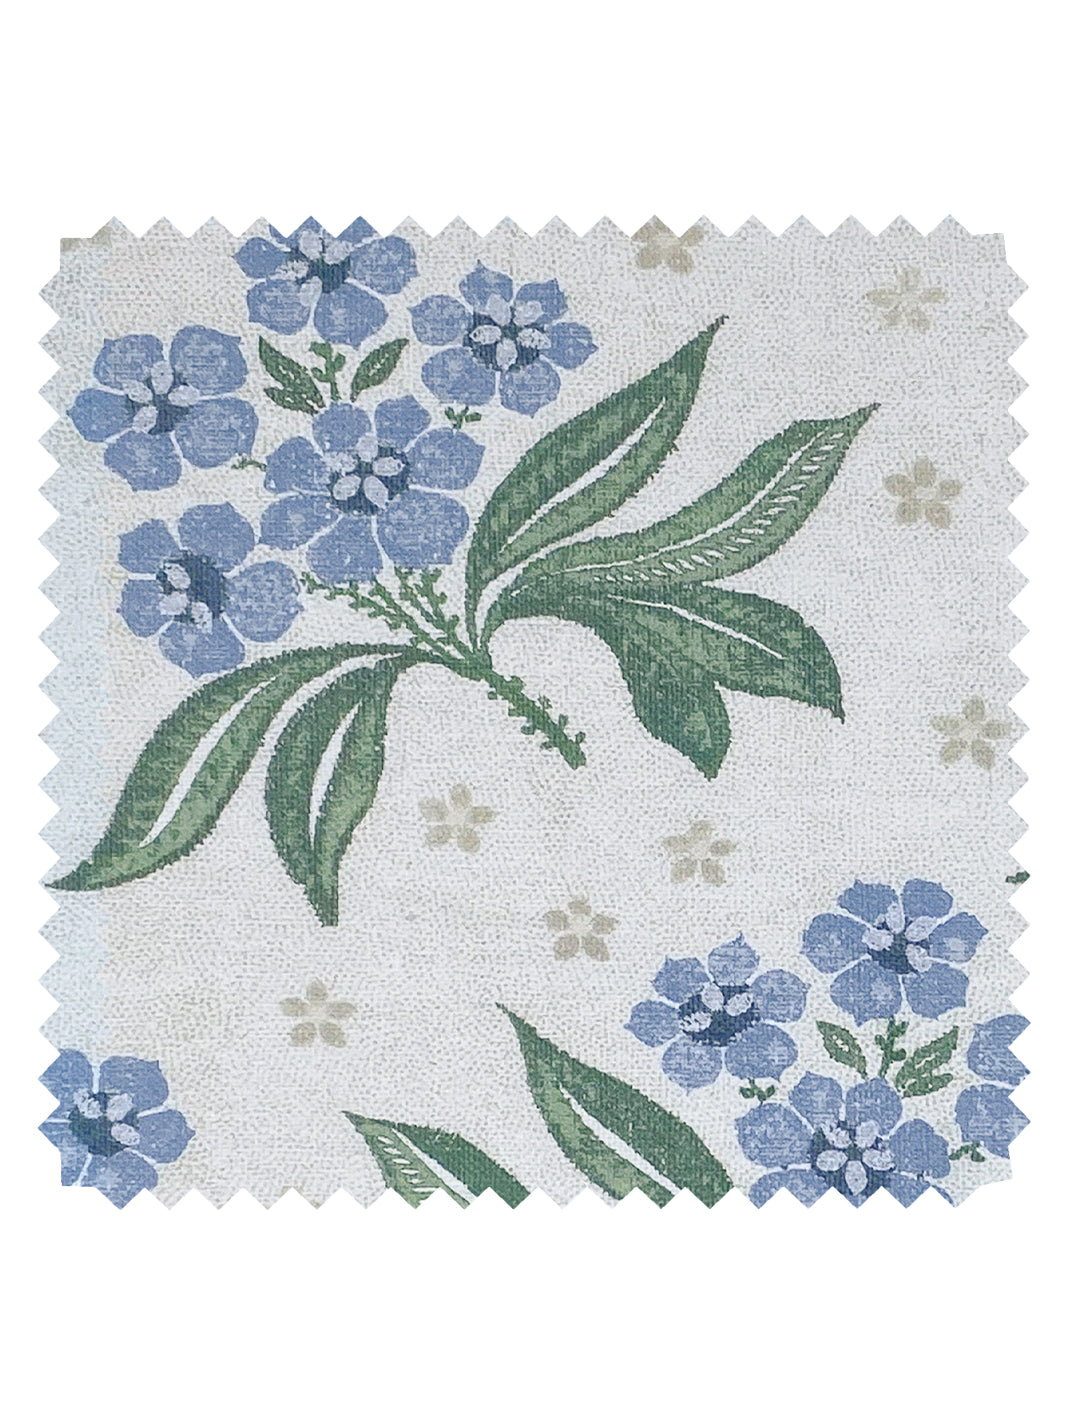 'Marian' Linen Fabric by Nathan Turner - Blue Green